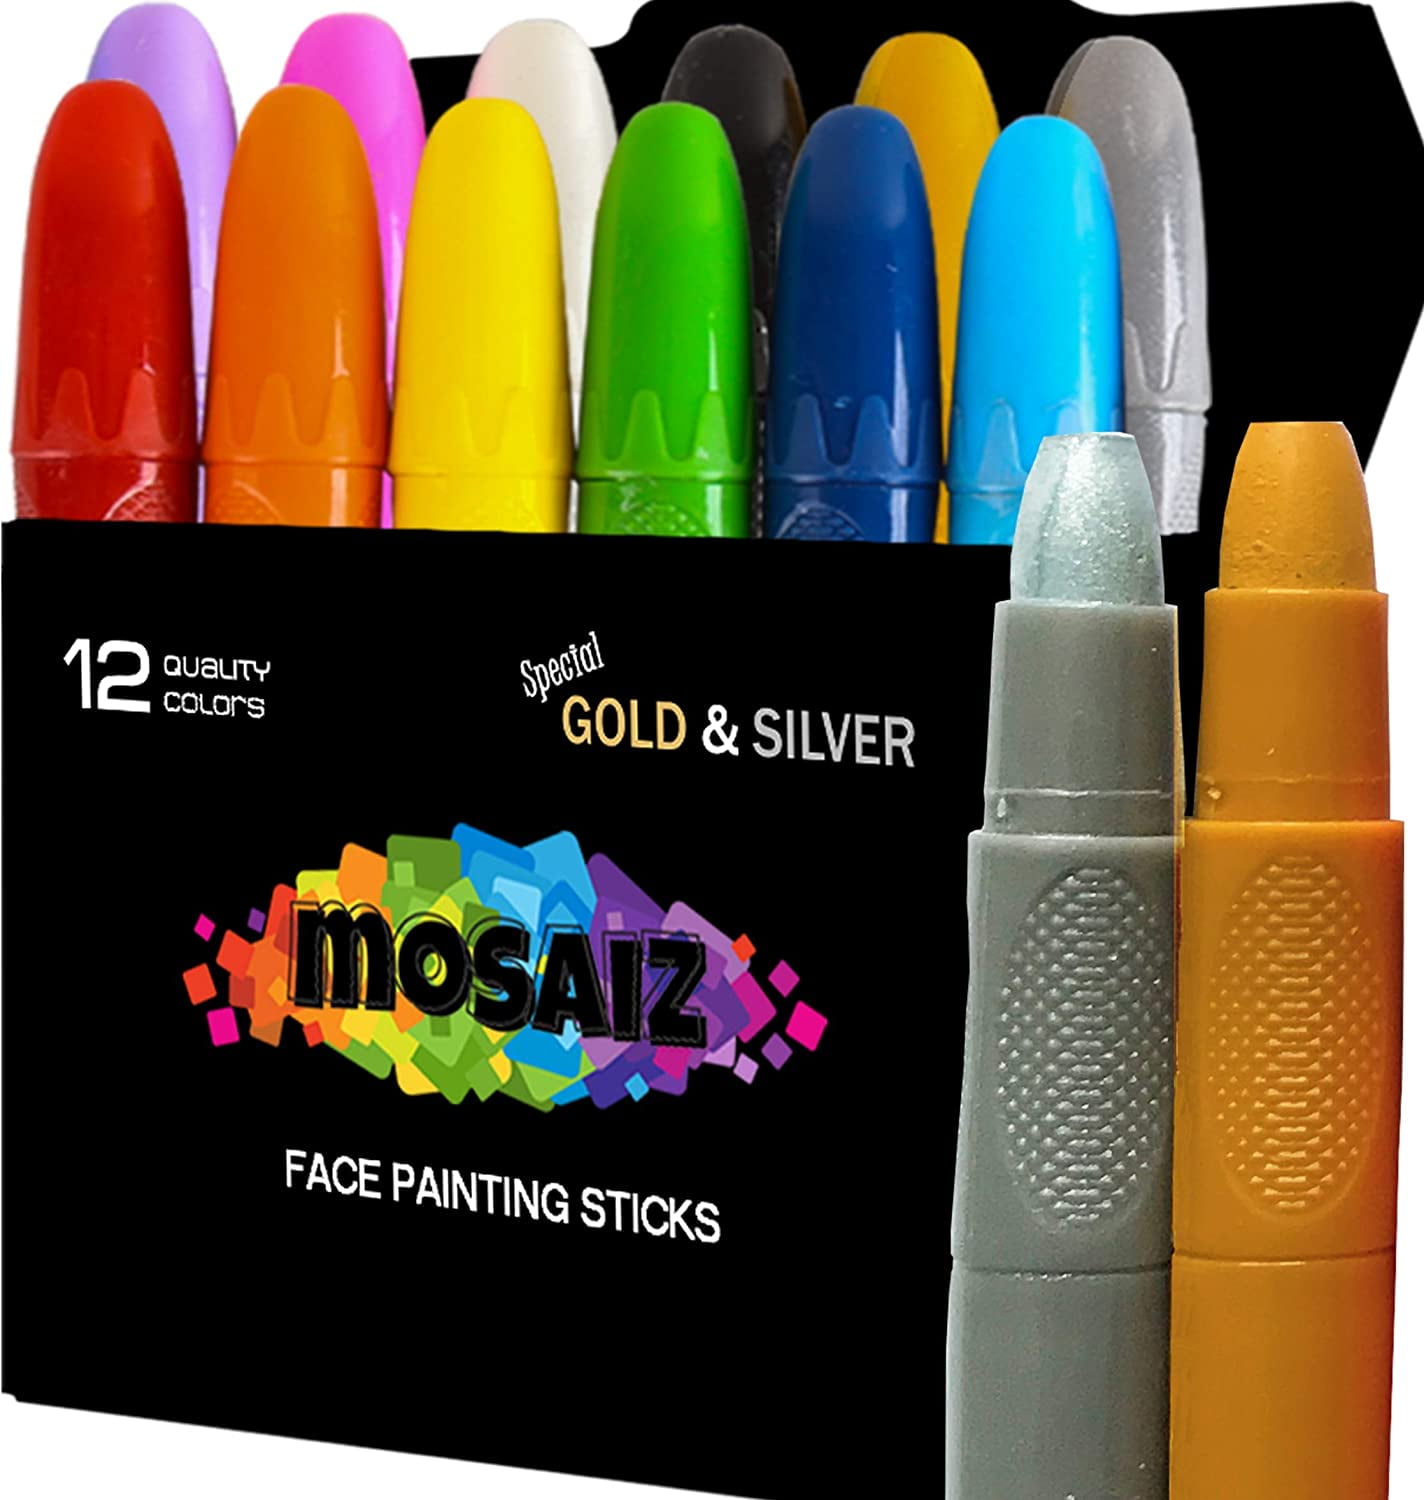  Mosaiz Face Makeup, Face Paint Kit, Halloween and Purim Makeup  Palette, Facepaint Set, Face Painting Kit for Kids Party of 16 colors, 2  Metallic Silver and Gold, 3 Brushes 100 Stencils